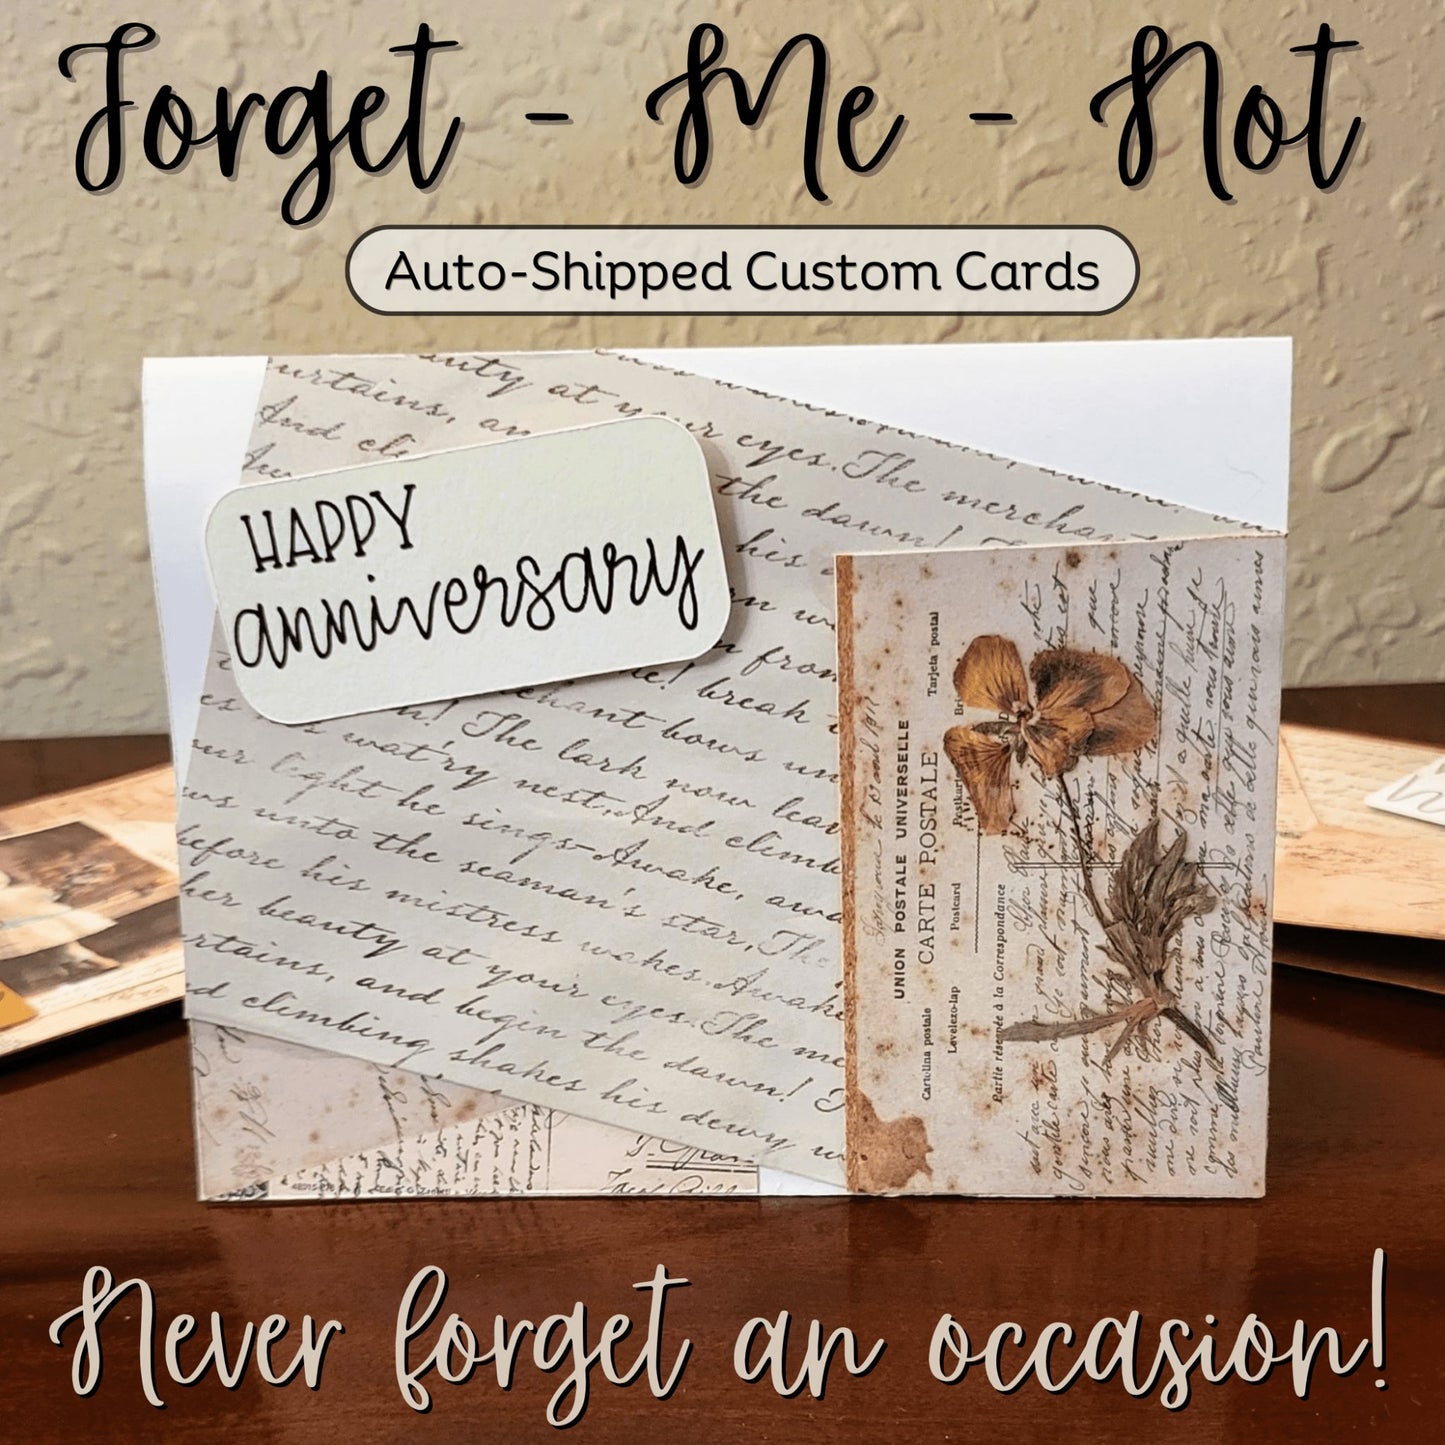 Forget-Me-Not Custom Cards - Auto-Shipped Greeting Card Service - Made-to-Order - 31 Rubies Designs